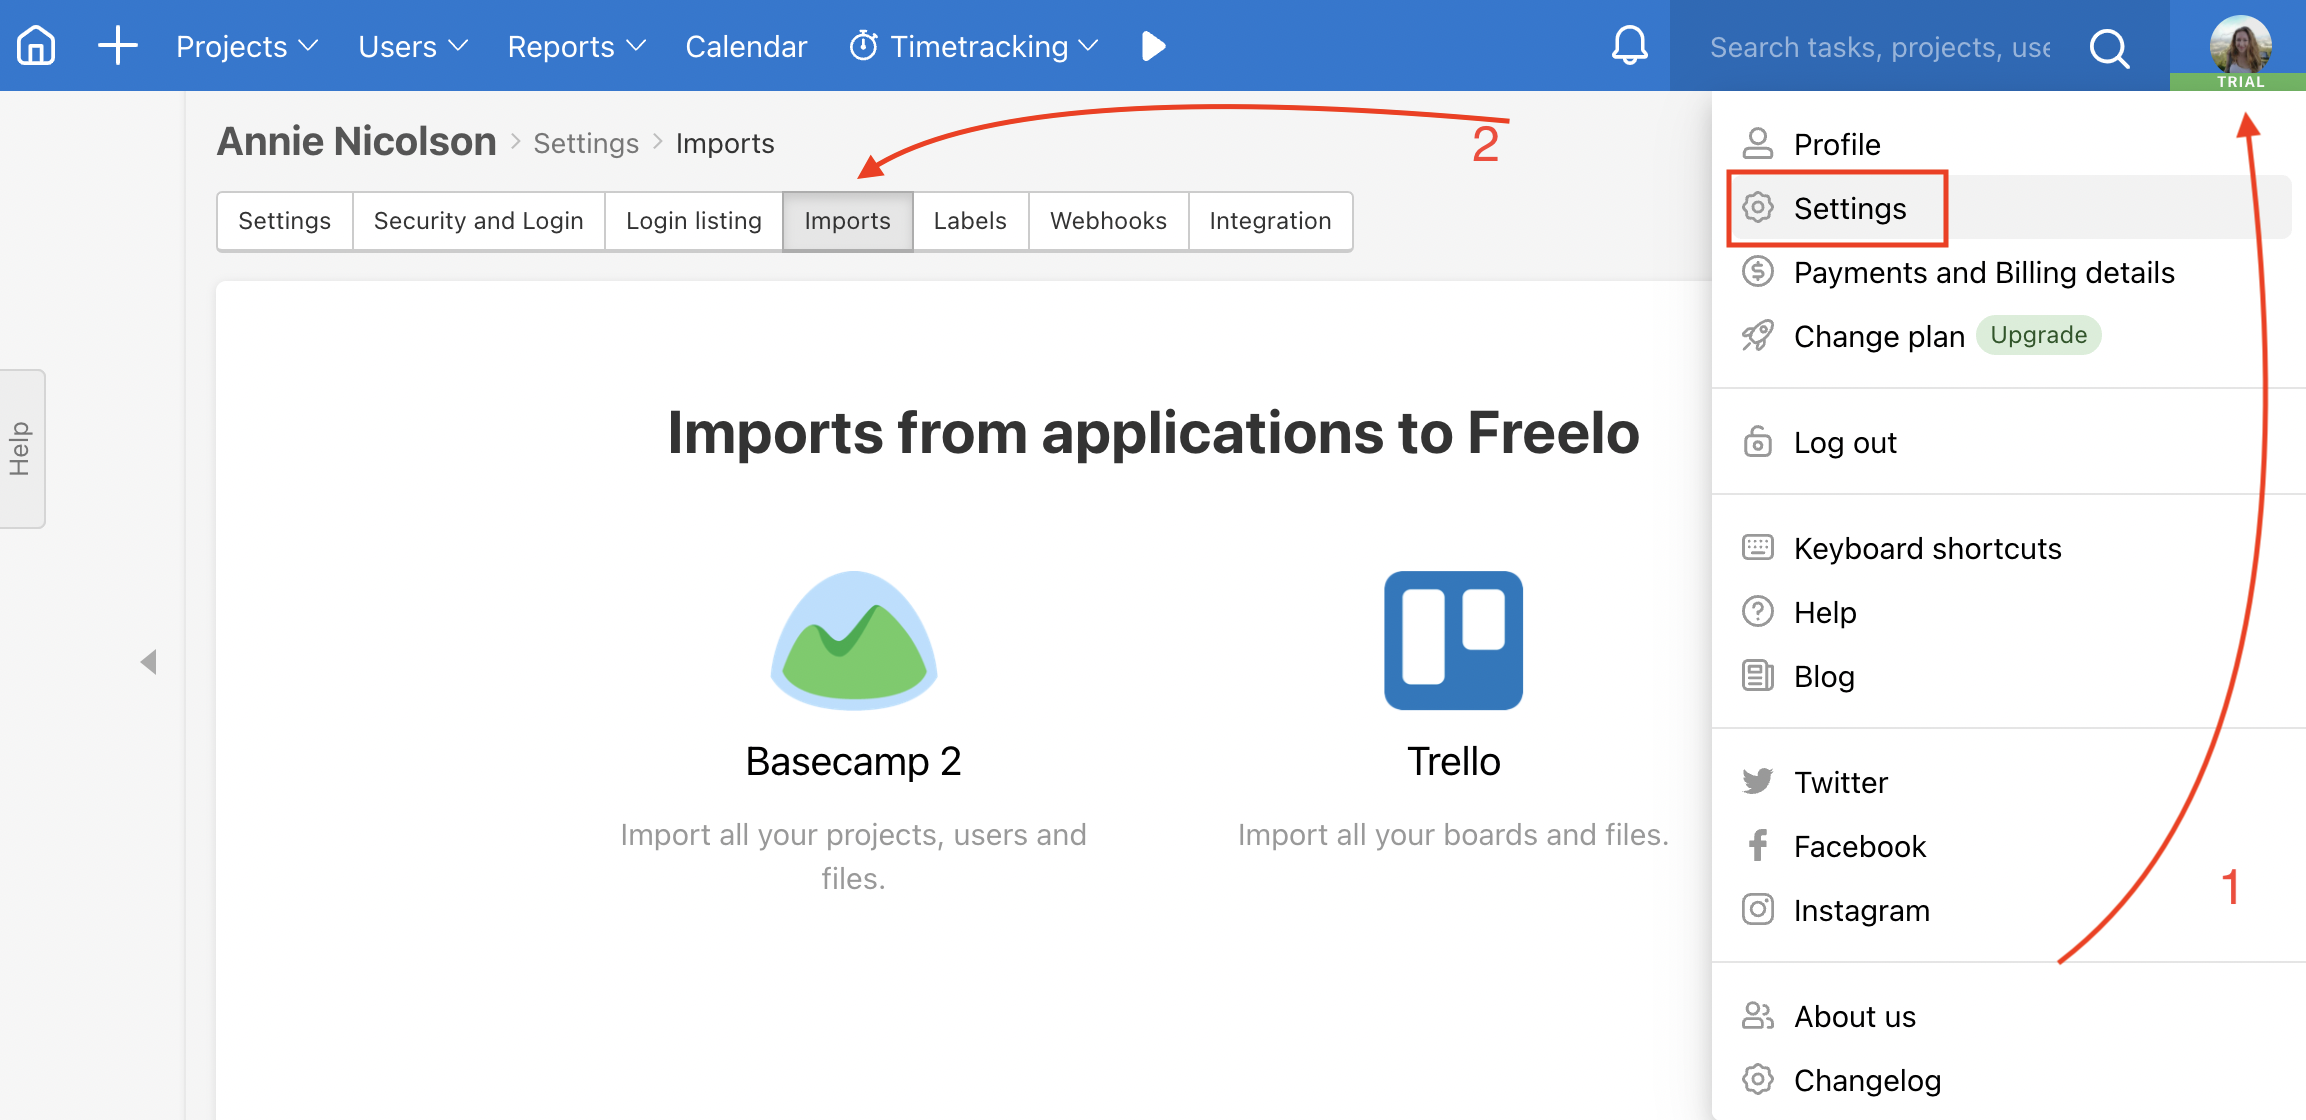 How to import data from Basecamp 2 to Freelo.